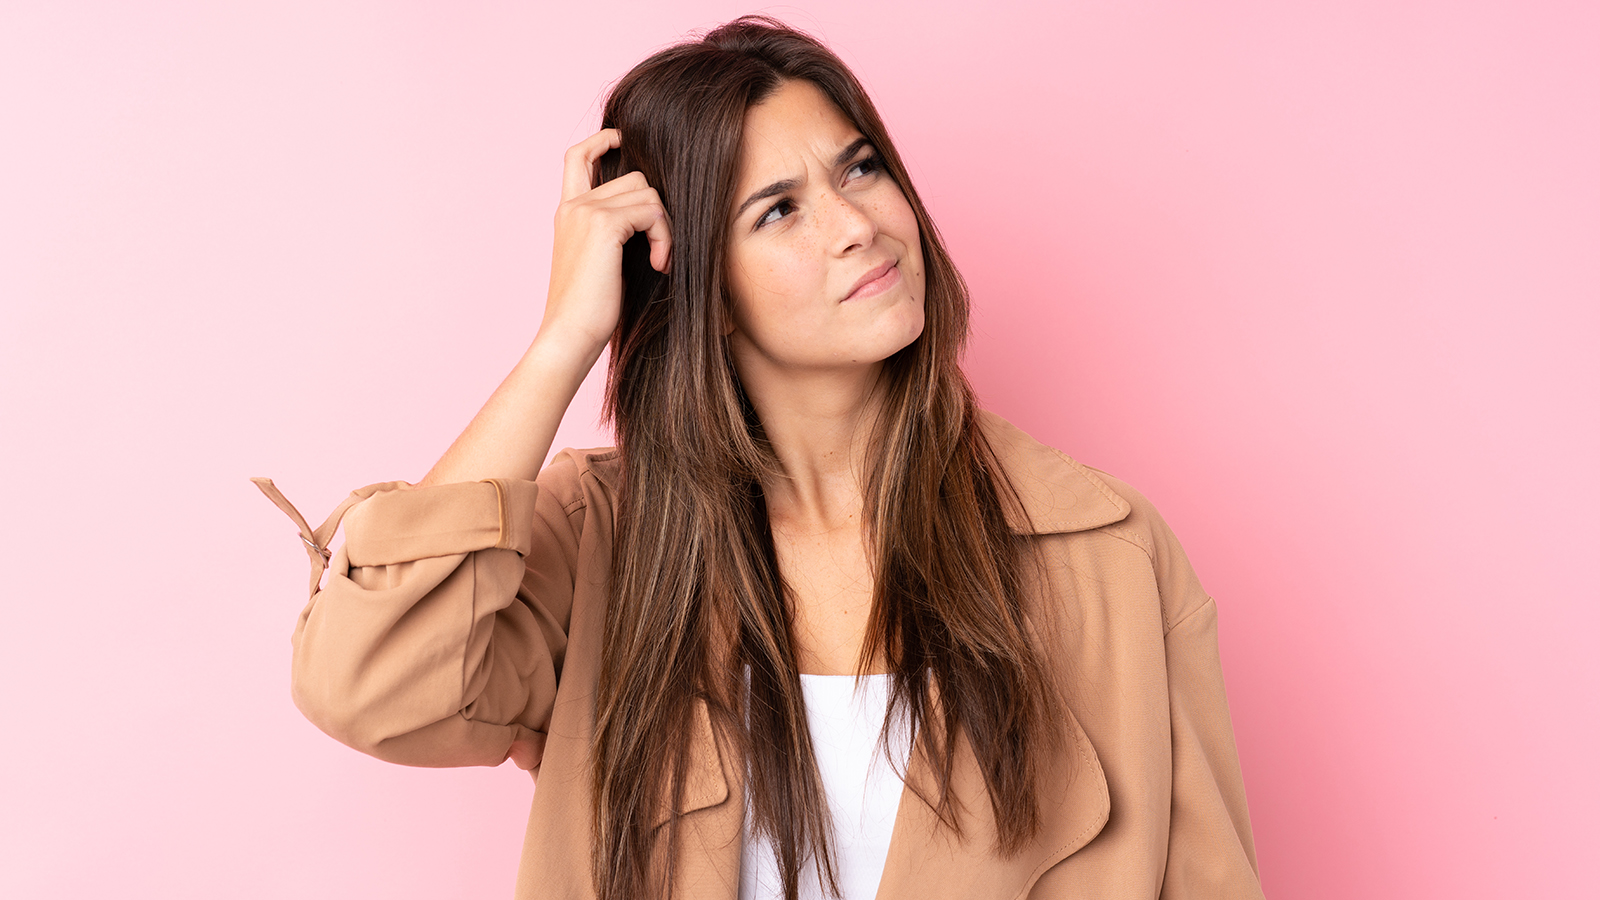 Teenager Brazilian girl over isolated pink background having doubts and with confuse face expression